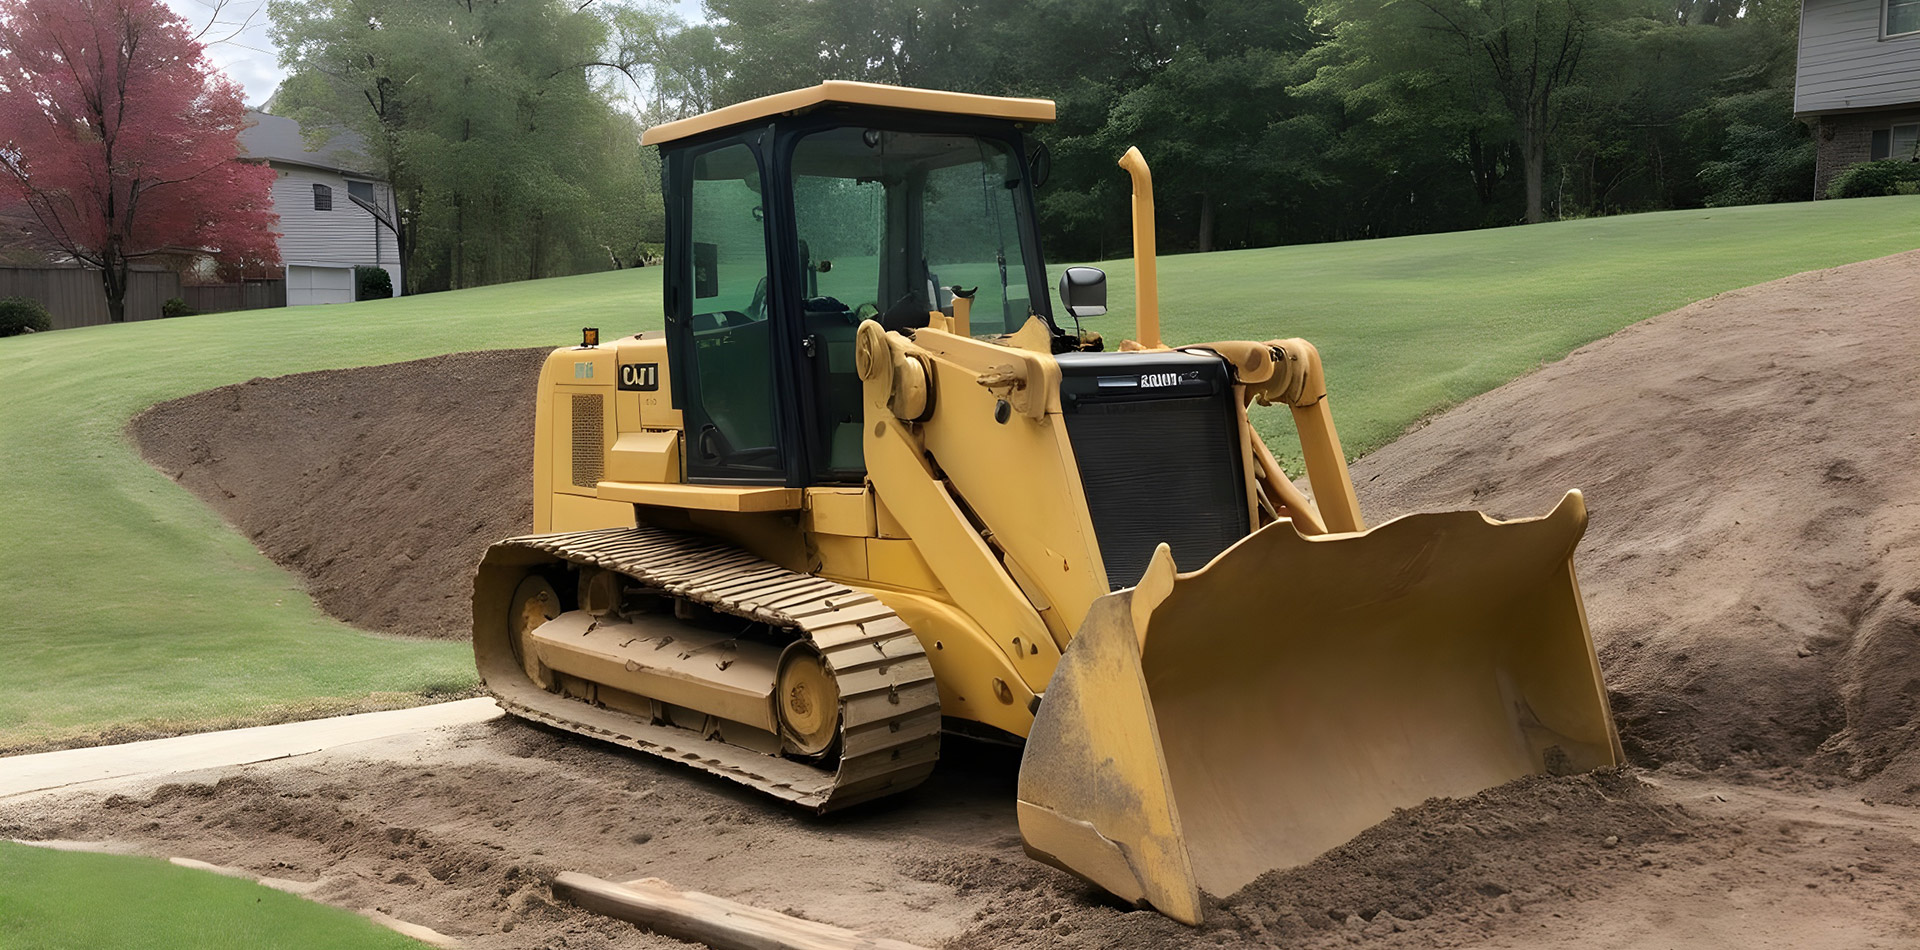 Bulldozer grading land in Northwest Arkansas to smooth out a yard